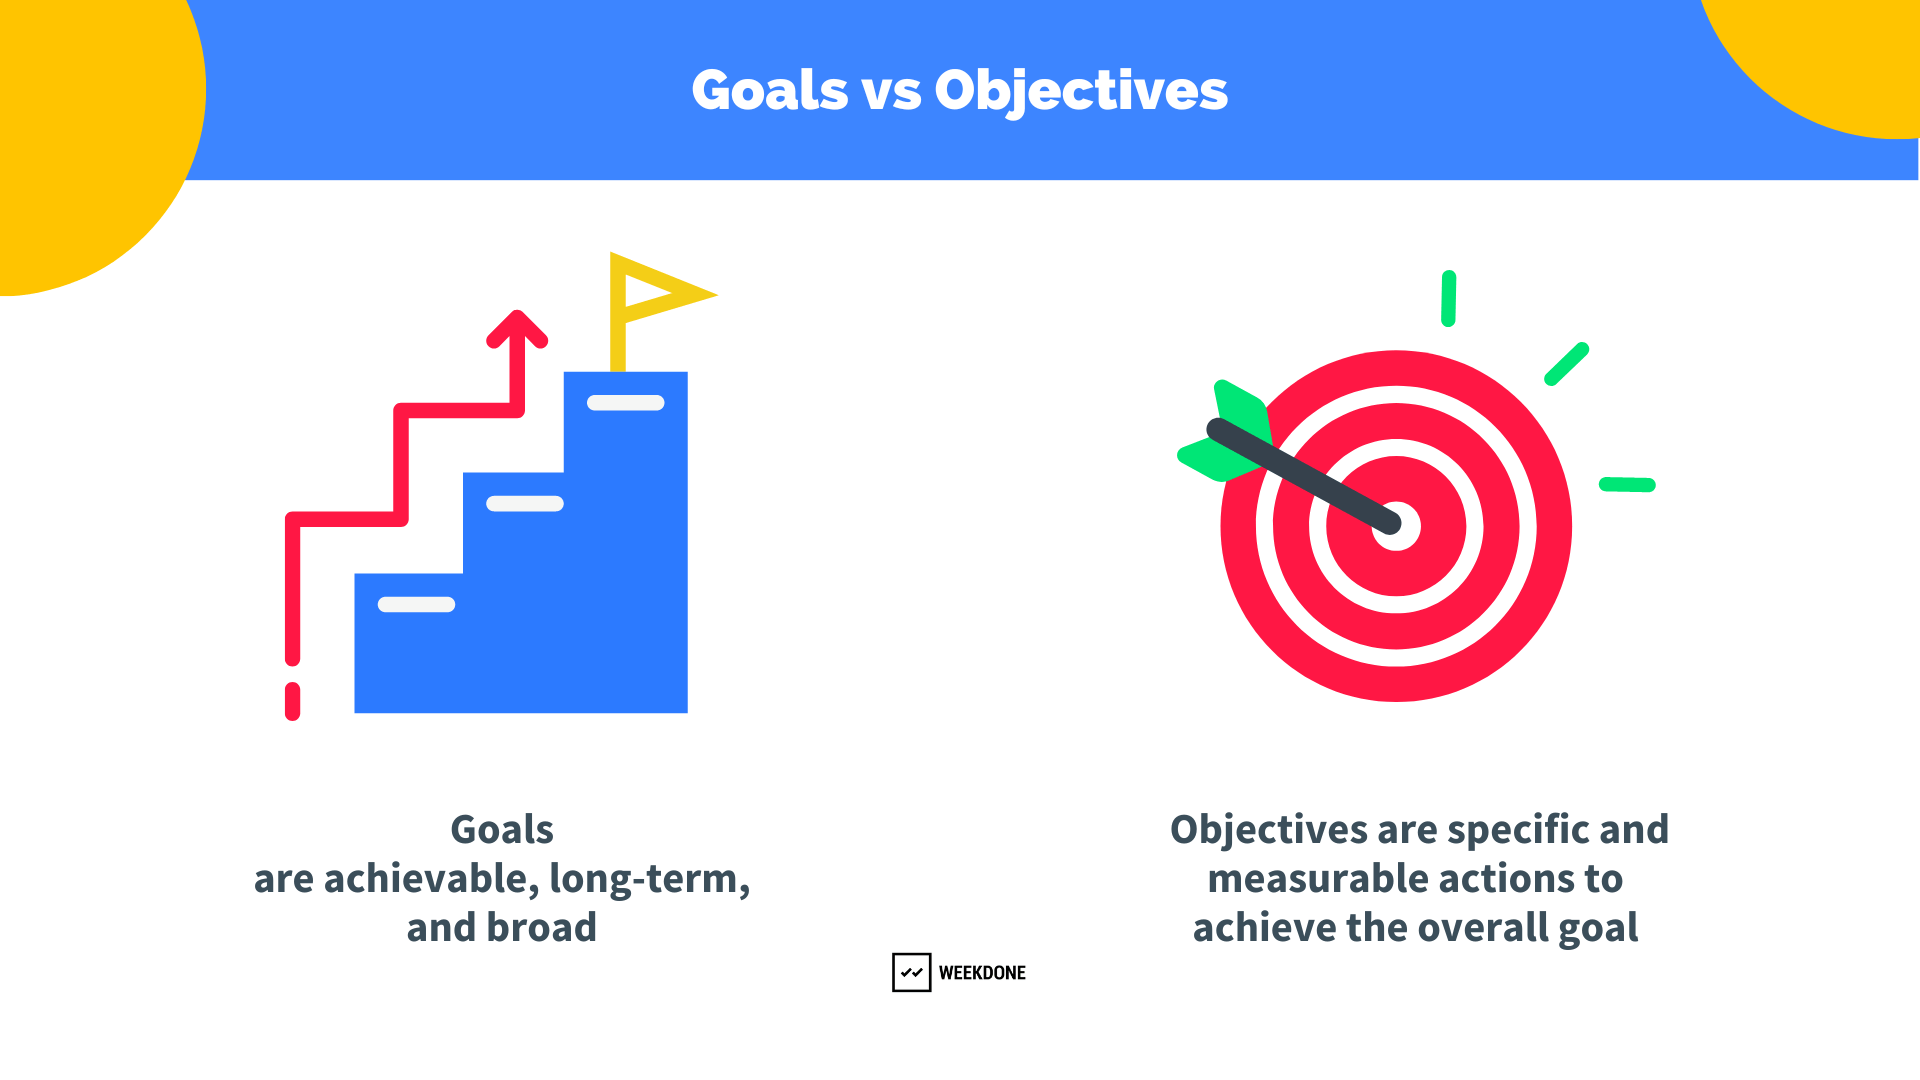 objectives images